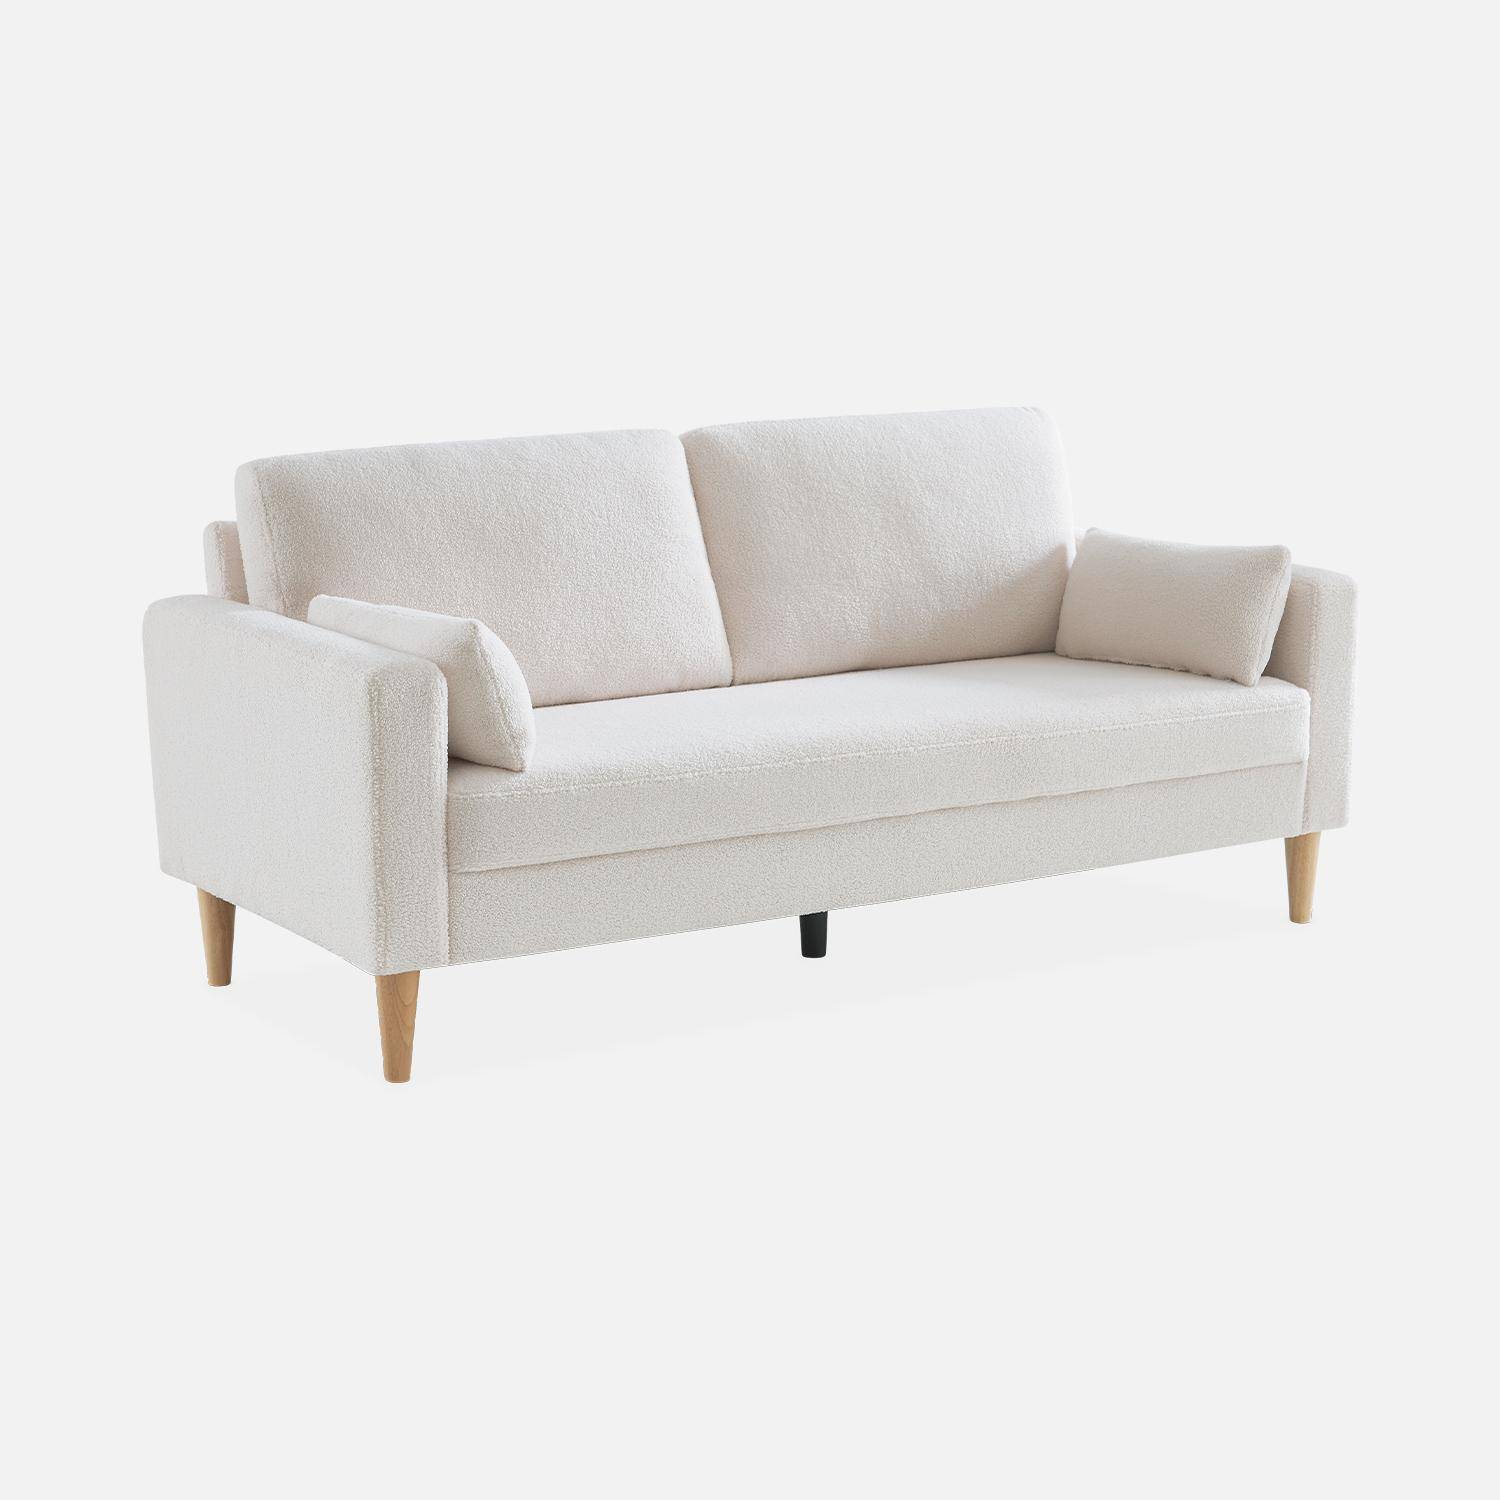 Large 3-seater sofa Scandi-style with wooden legs - Bjorn - white boucle,sweeek,Photo3